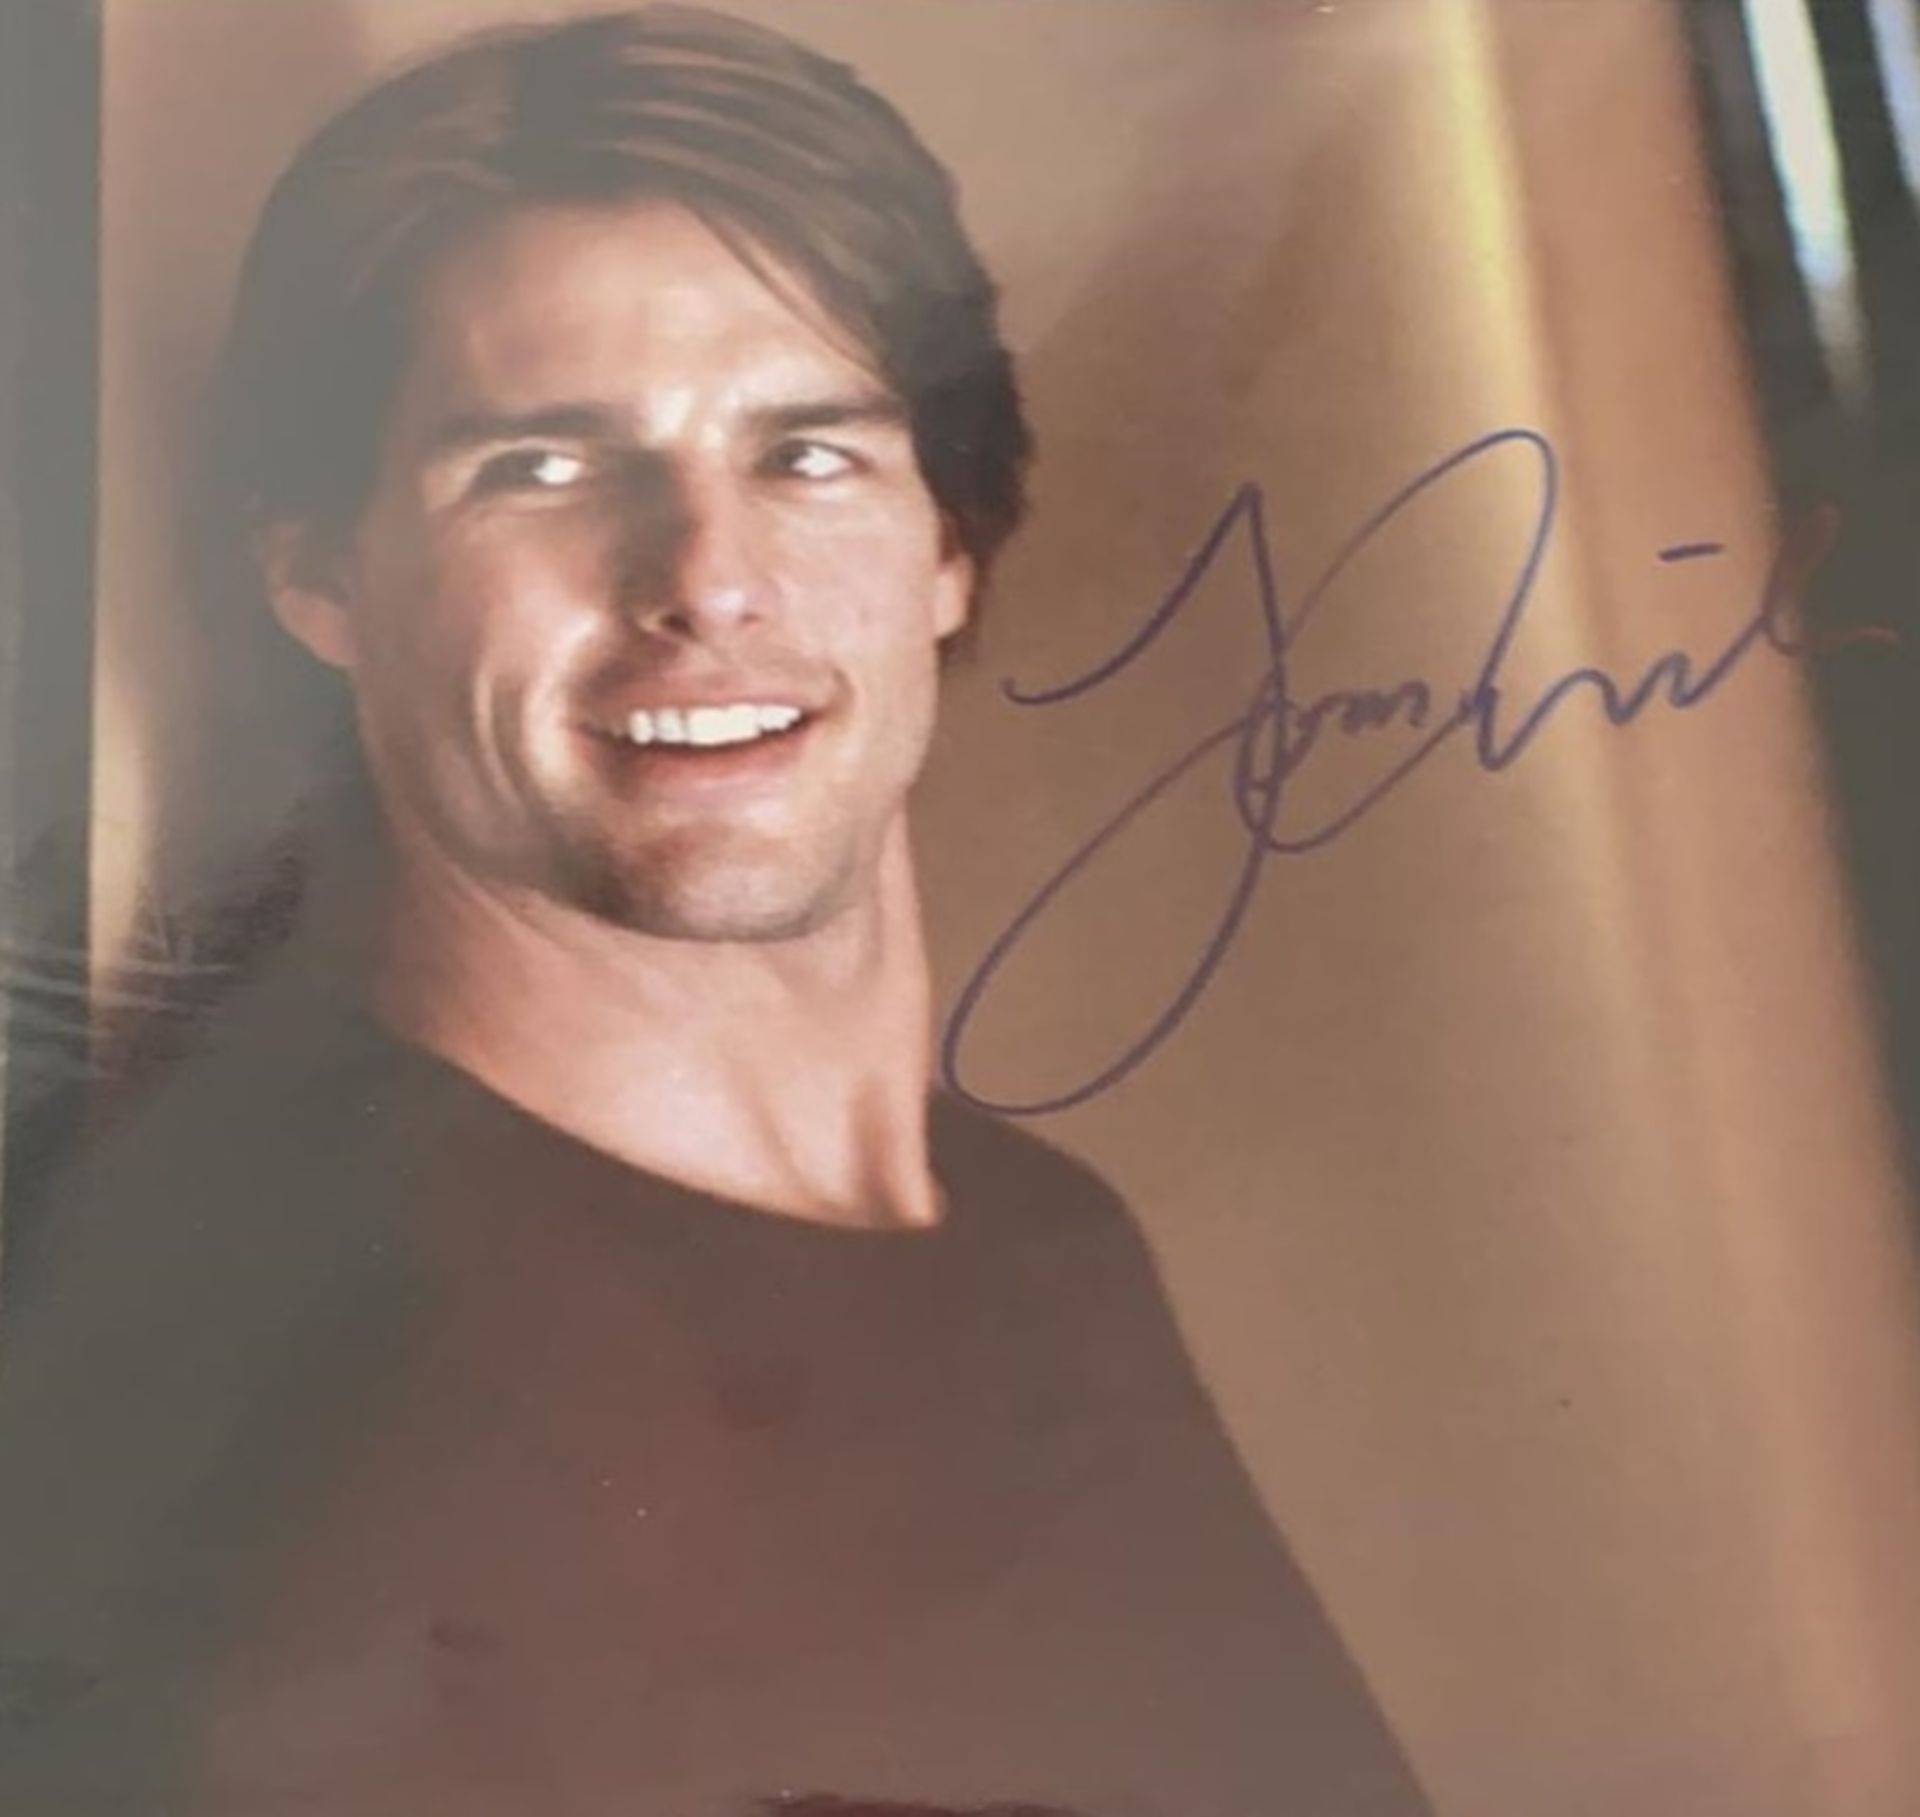 1 x Signed Autograph Picture - TOM CRUISE - With COA - Size 12 x 8 Inch - NO VAT ON THE HAMMER PRICE